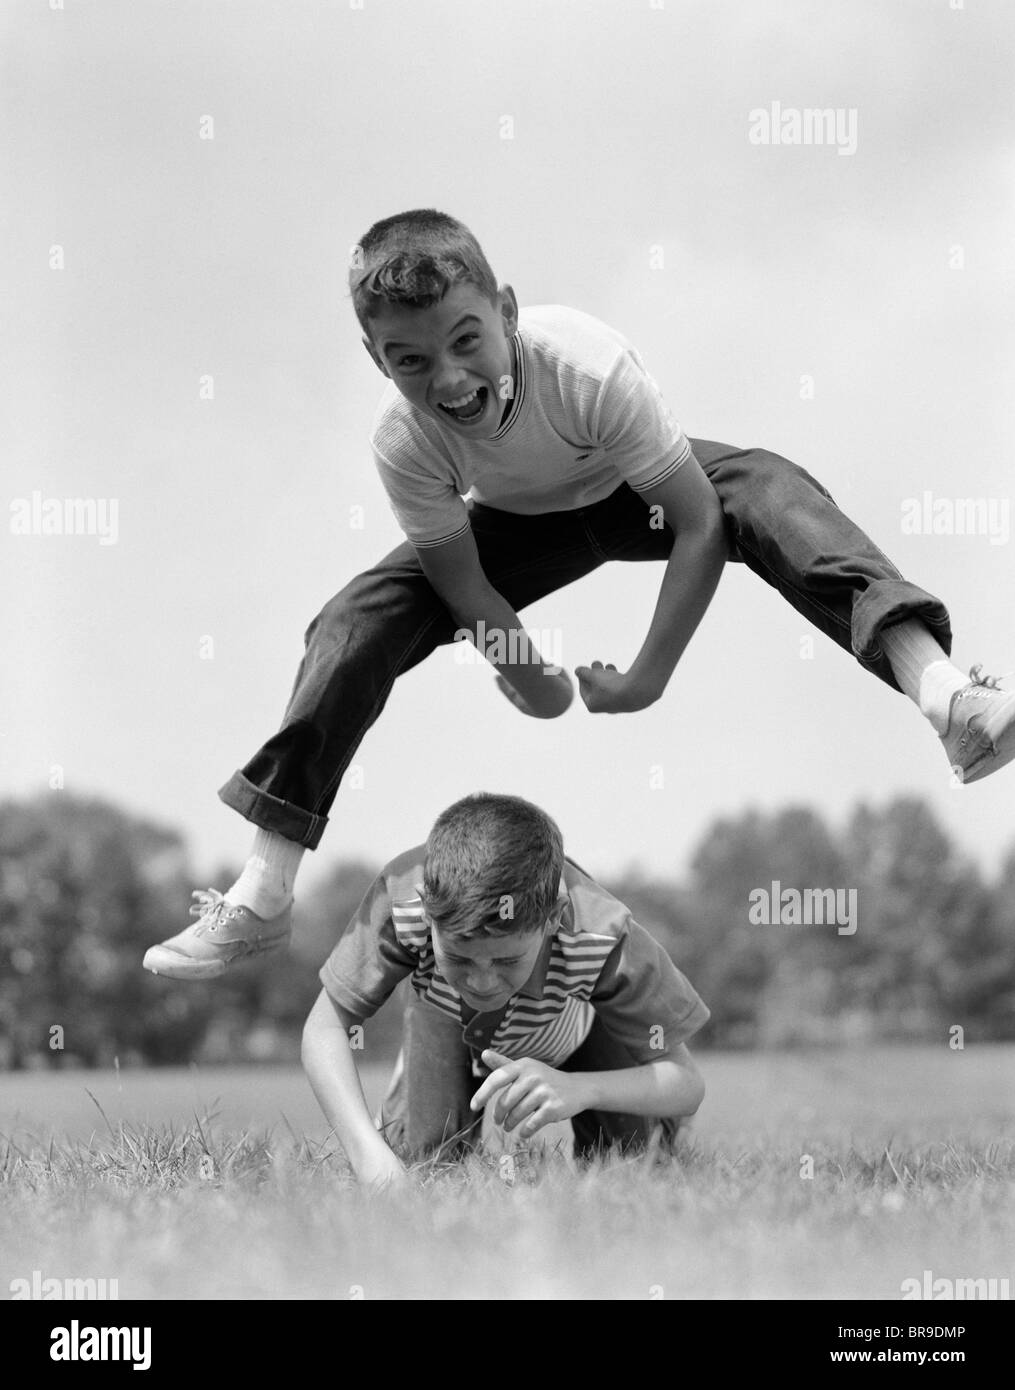 1960s BOYS PLAYING LEAP FROG OUTSIDE SKY GRASS JUMP JUMPING CROUCHING ...